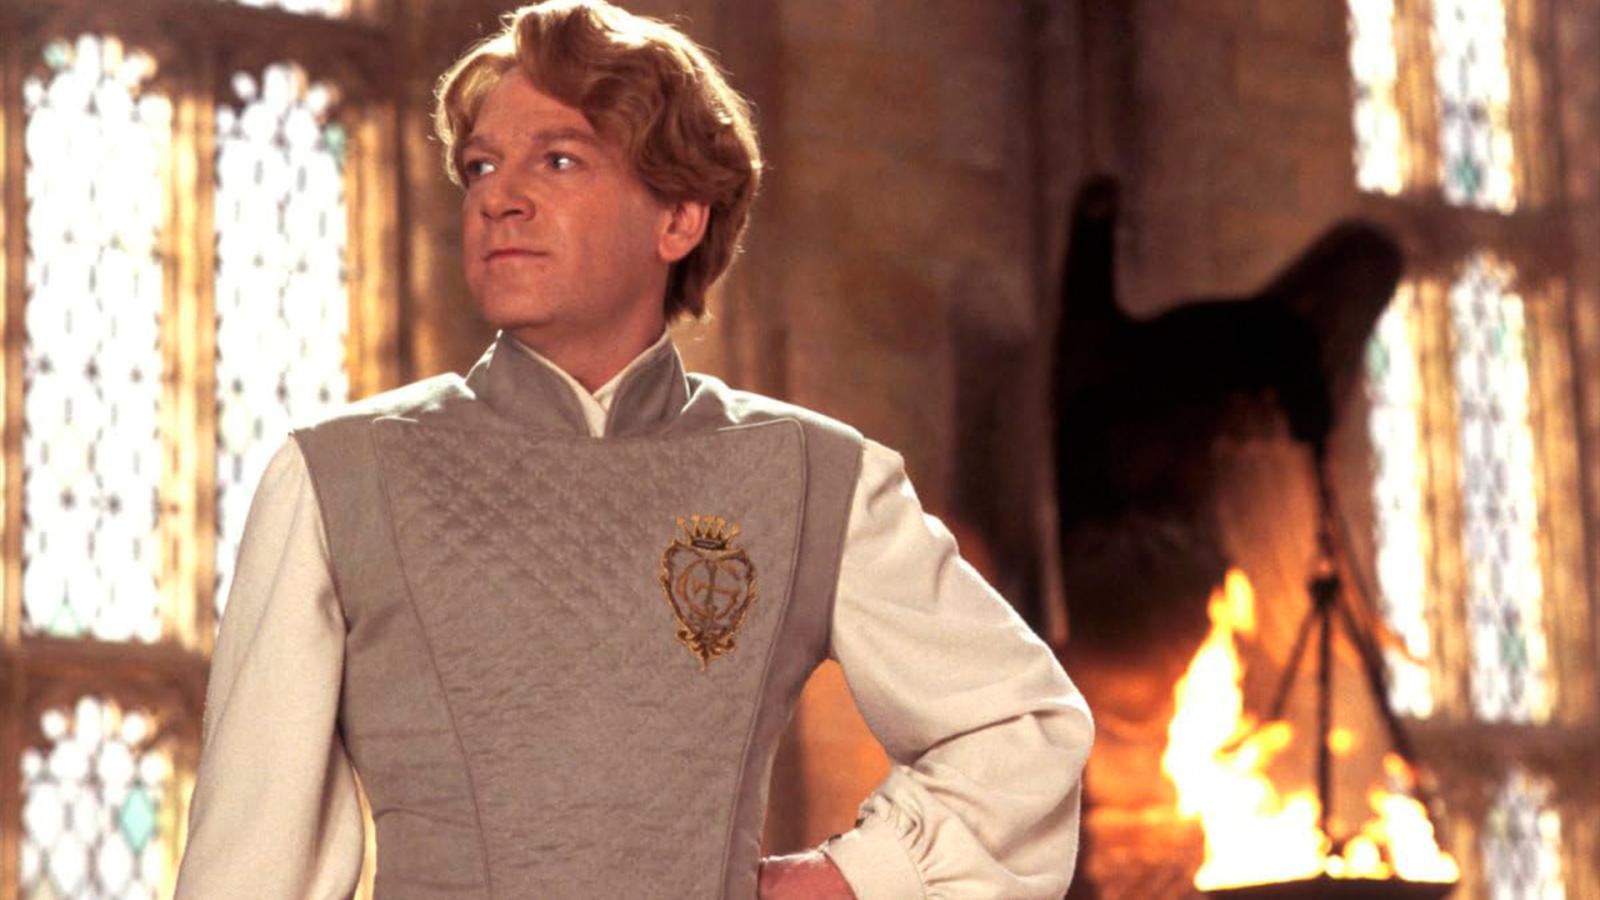 5 Absolutely Deranged Harry Potter Villains No One Really Lists as Such - image 1